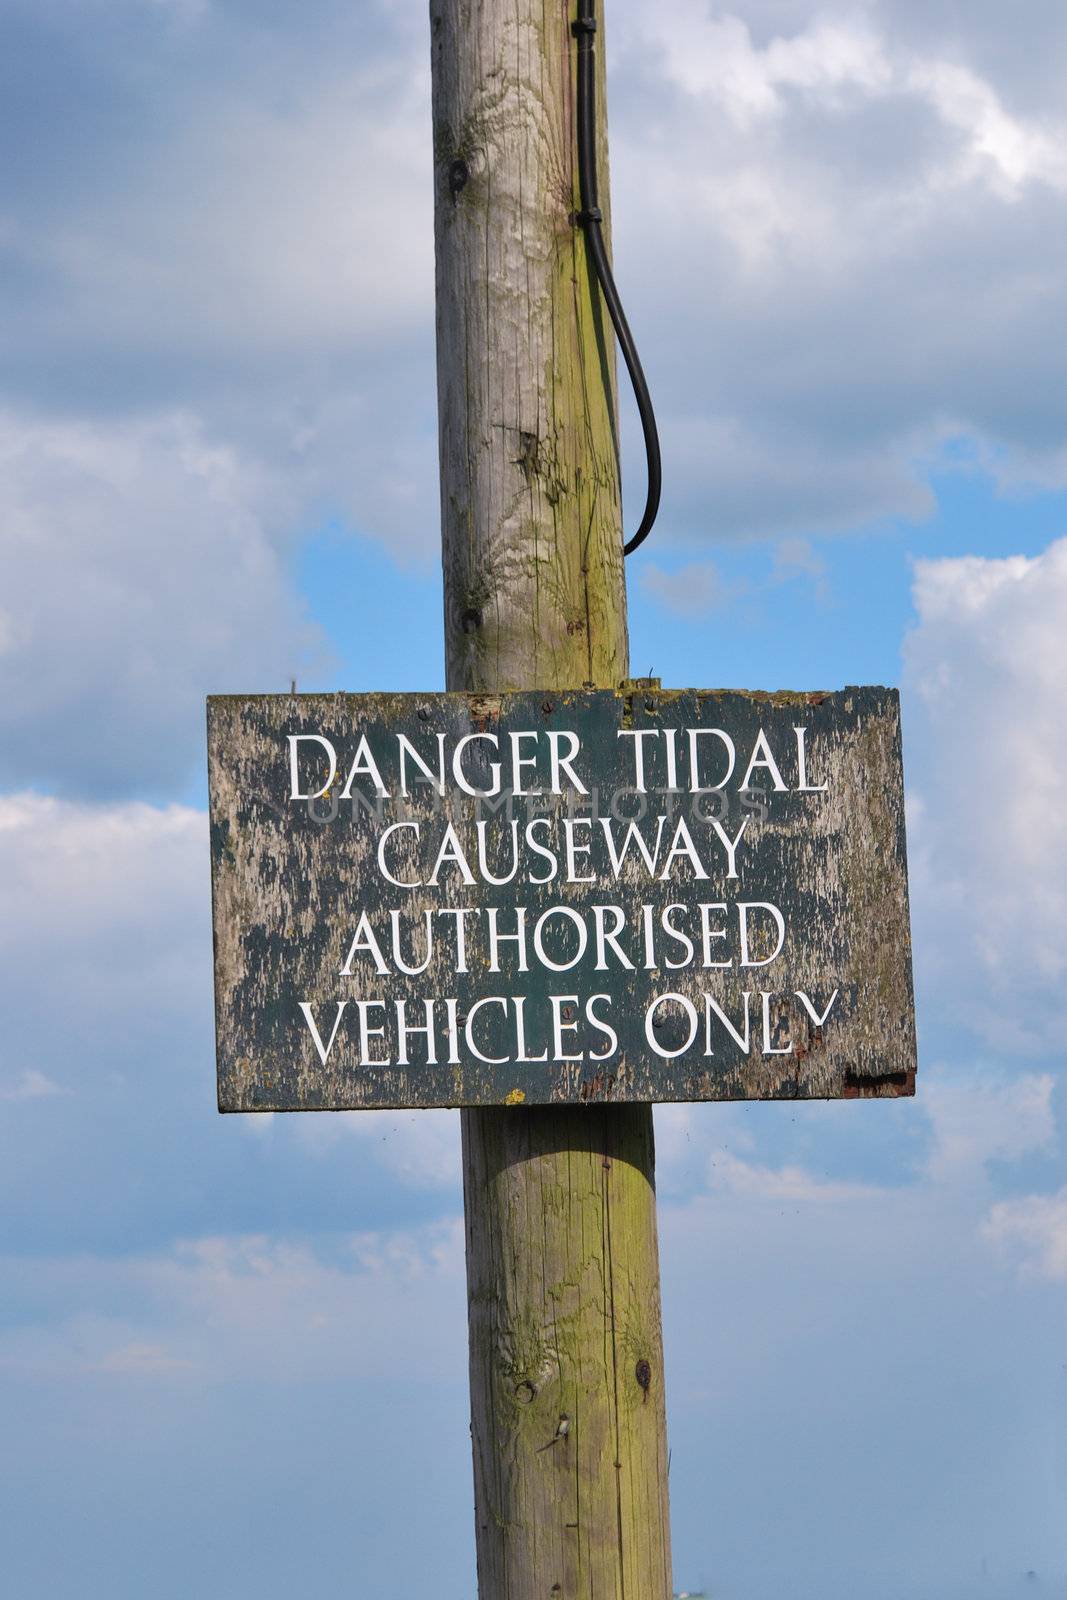 Tidal causeway sign for vehicles only